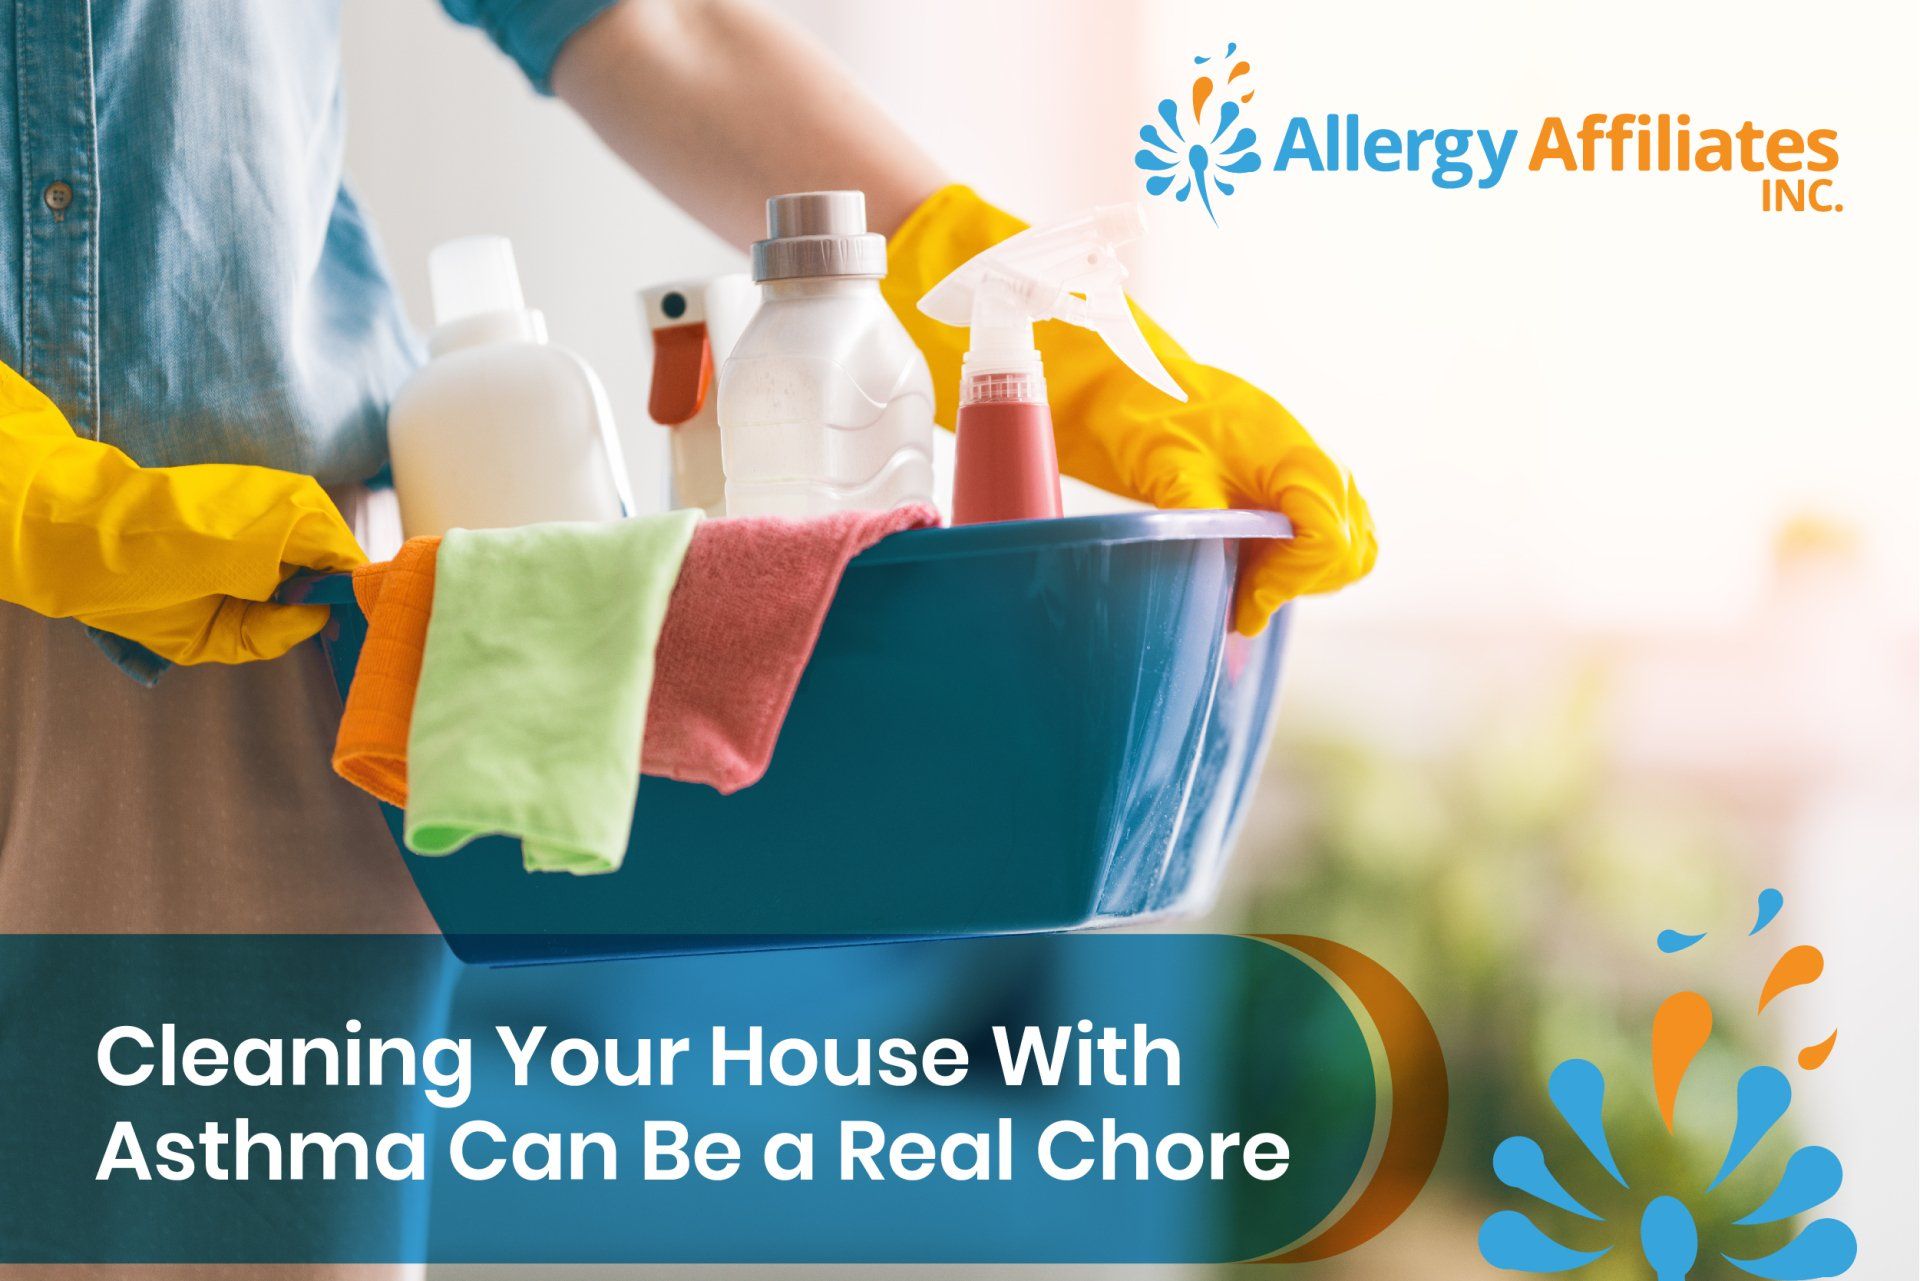 Cleaning Your House with Asthma Can Be a Real Chore